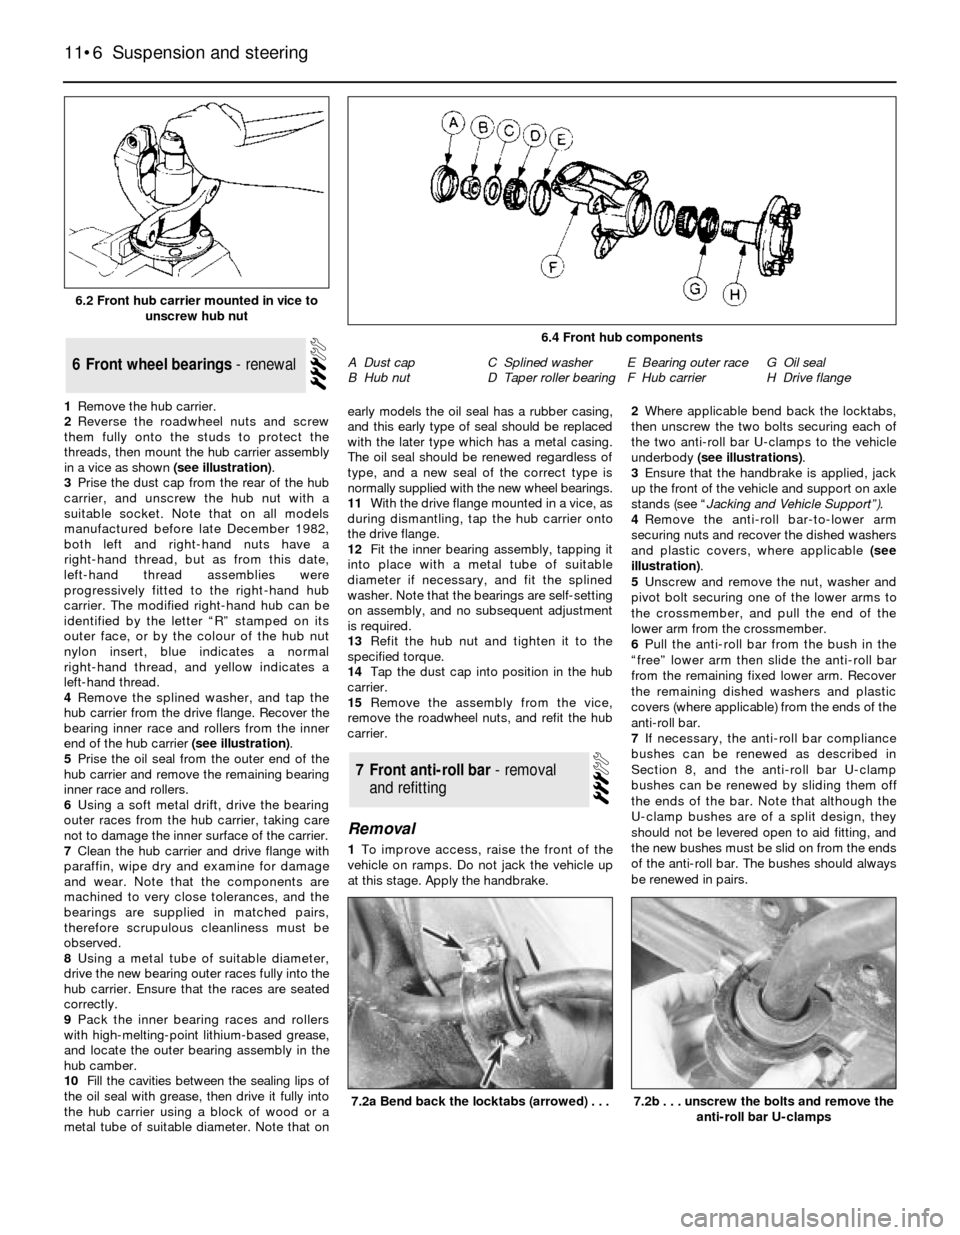 FORD SIERRA 1982 1.G Suspension And Steering Workshop Manual 1Remove the hub carrier.
2Reverse the roadwheel nuts and screw
them fully onto the studs to protect the
threads, then mount the hub carrier assembly
in a vice as shown (see illustration).
3Prise the d